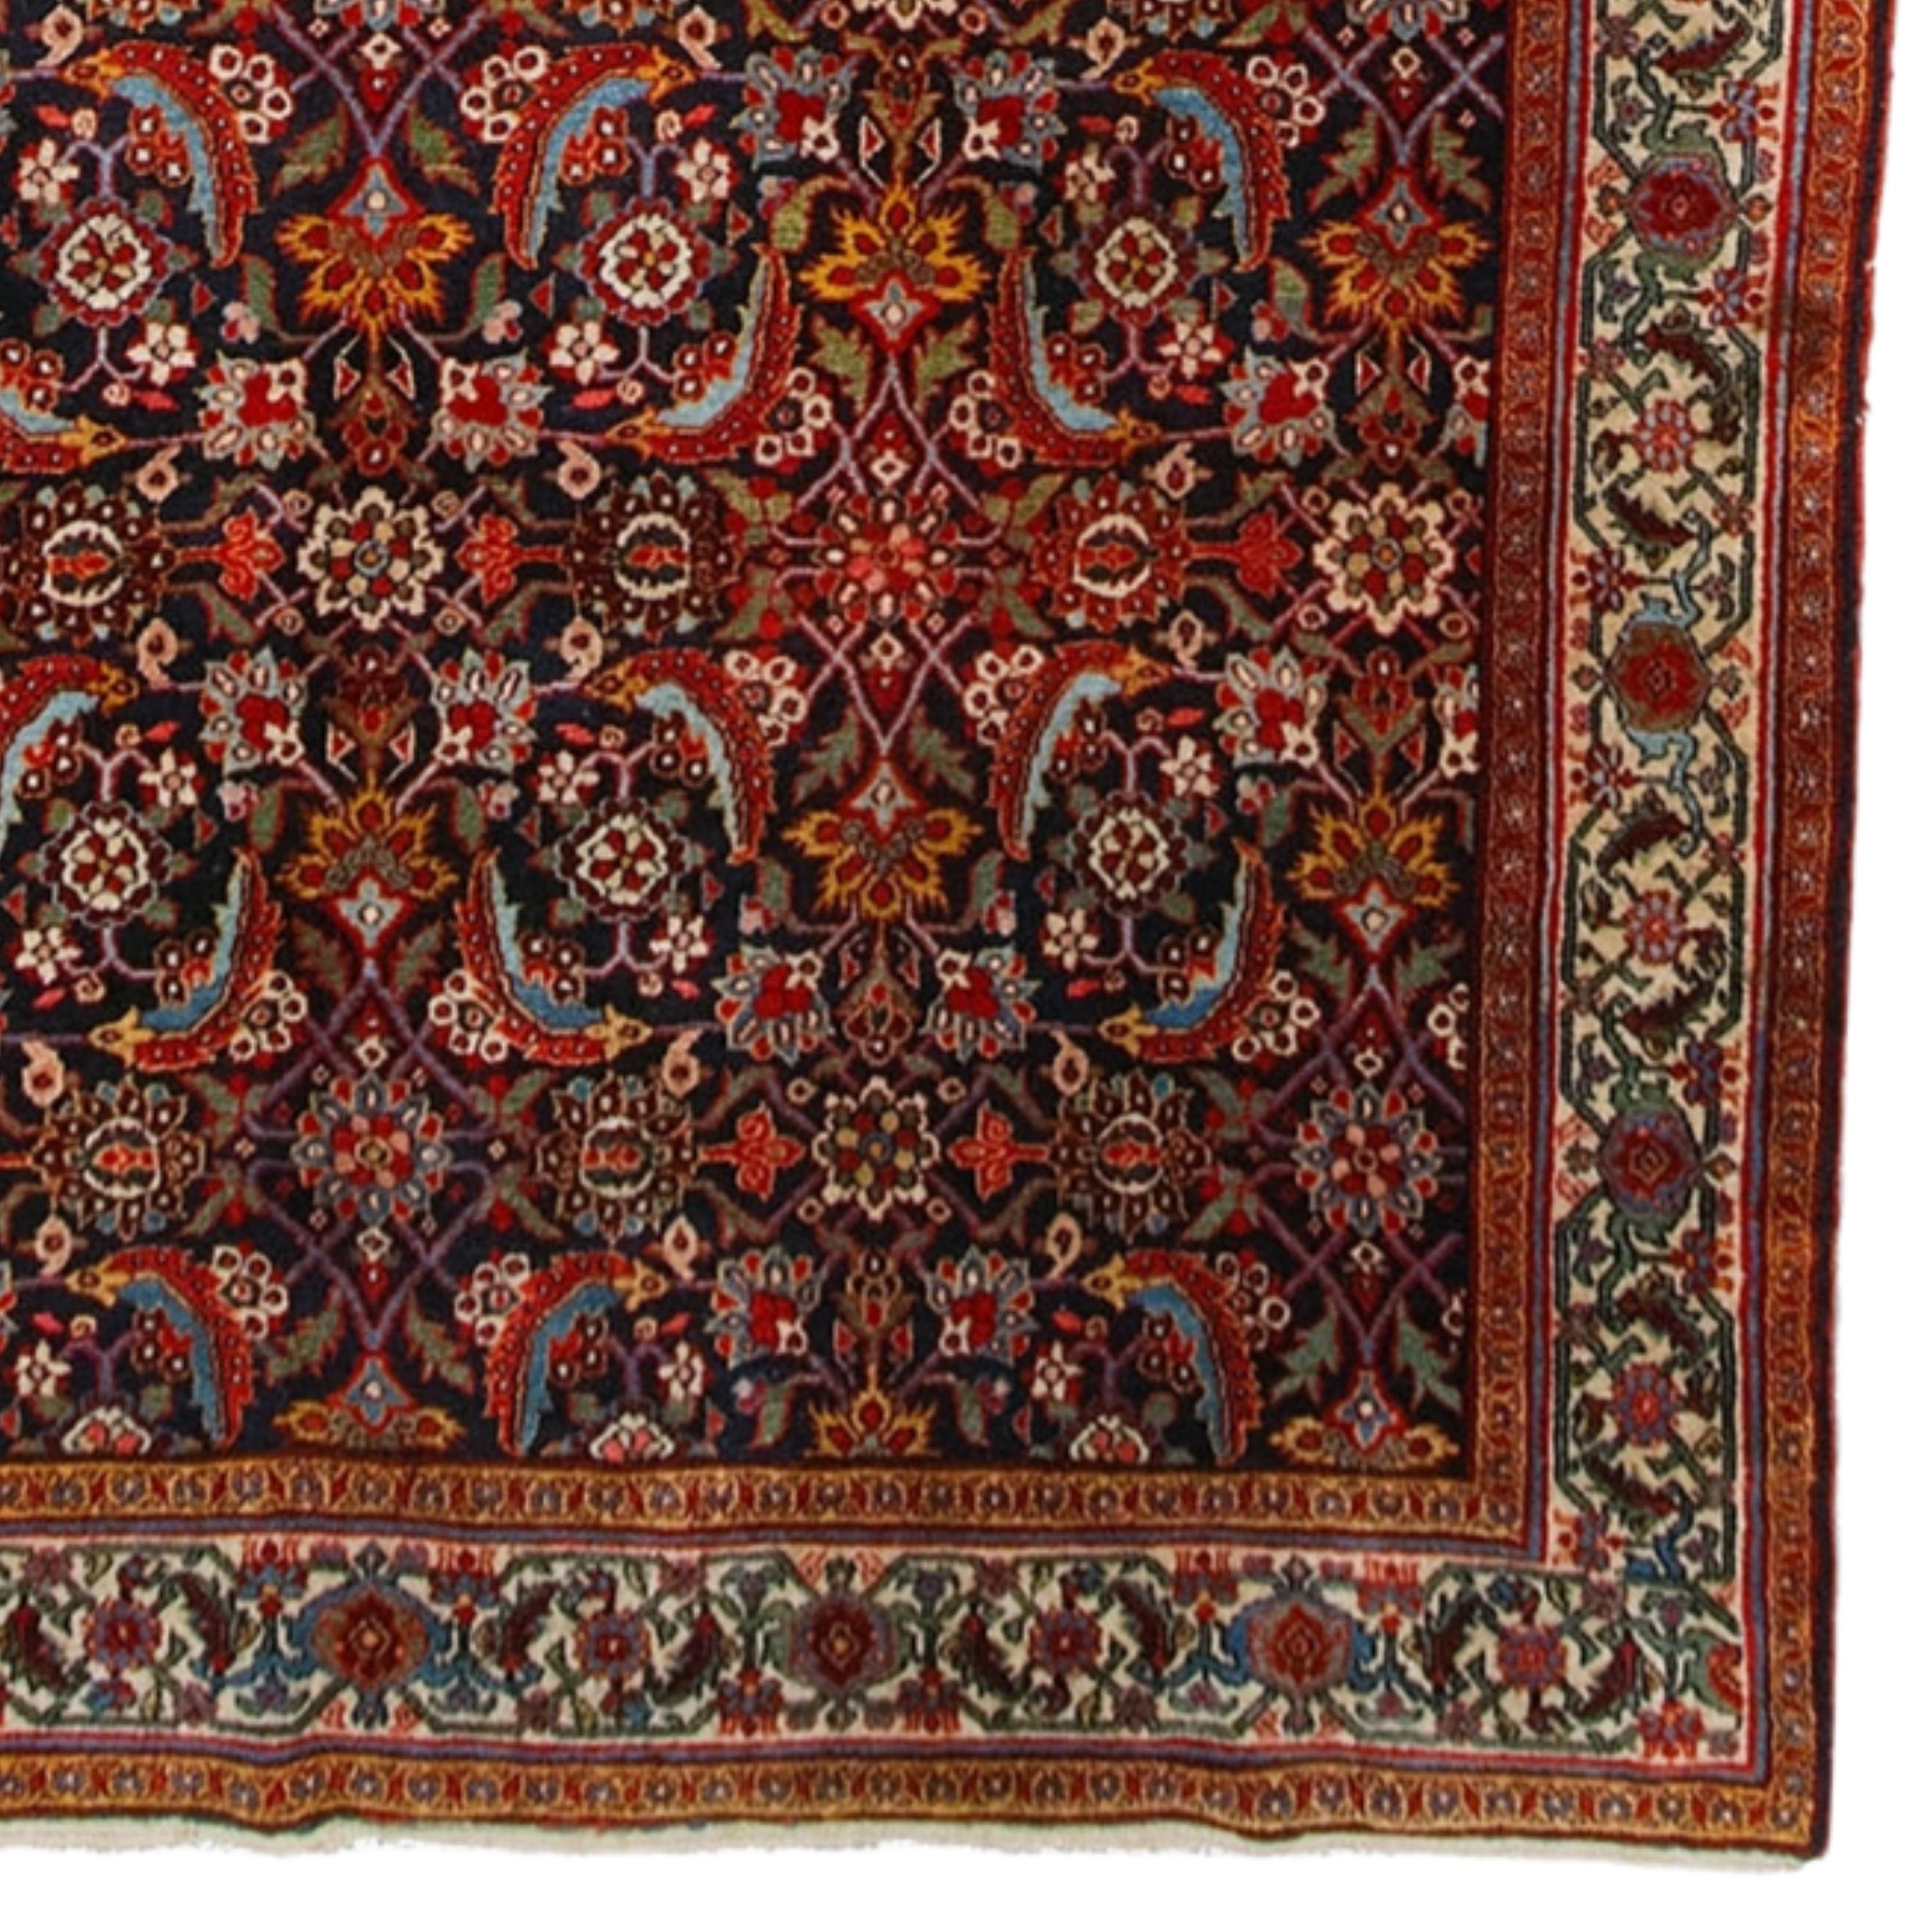 Wool Antique Sarap Carpet - Late of the 19th Century Sarap Rug, Antique Rug For Sale